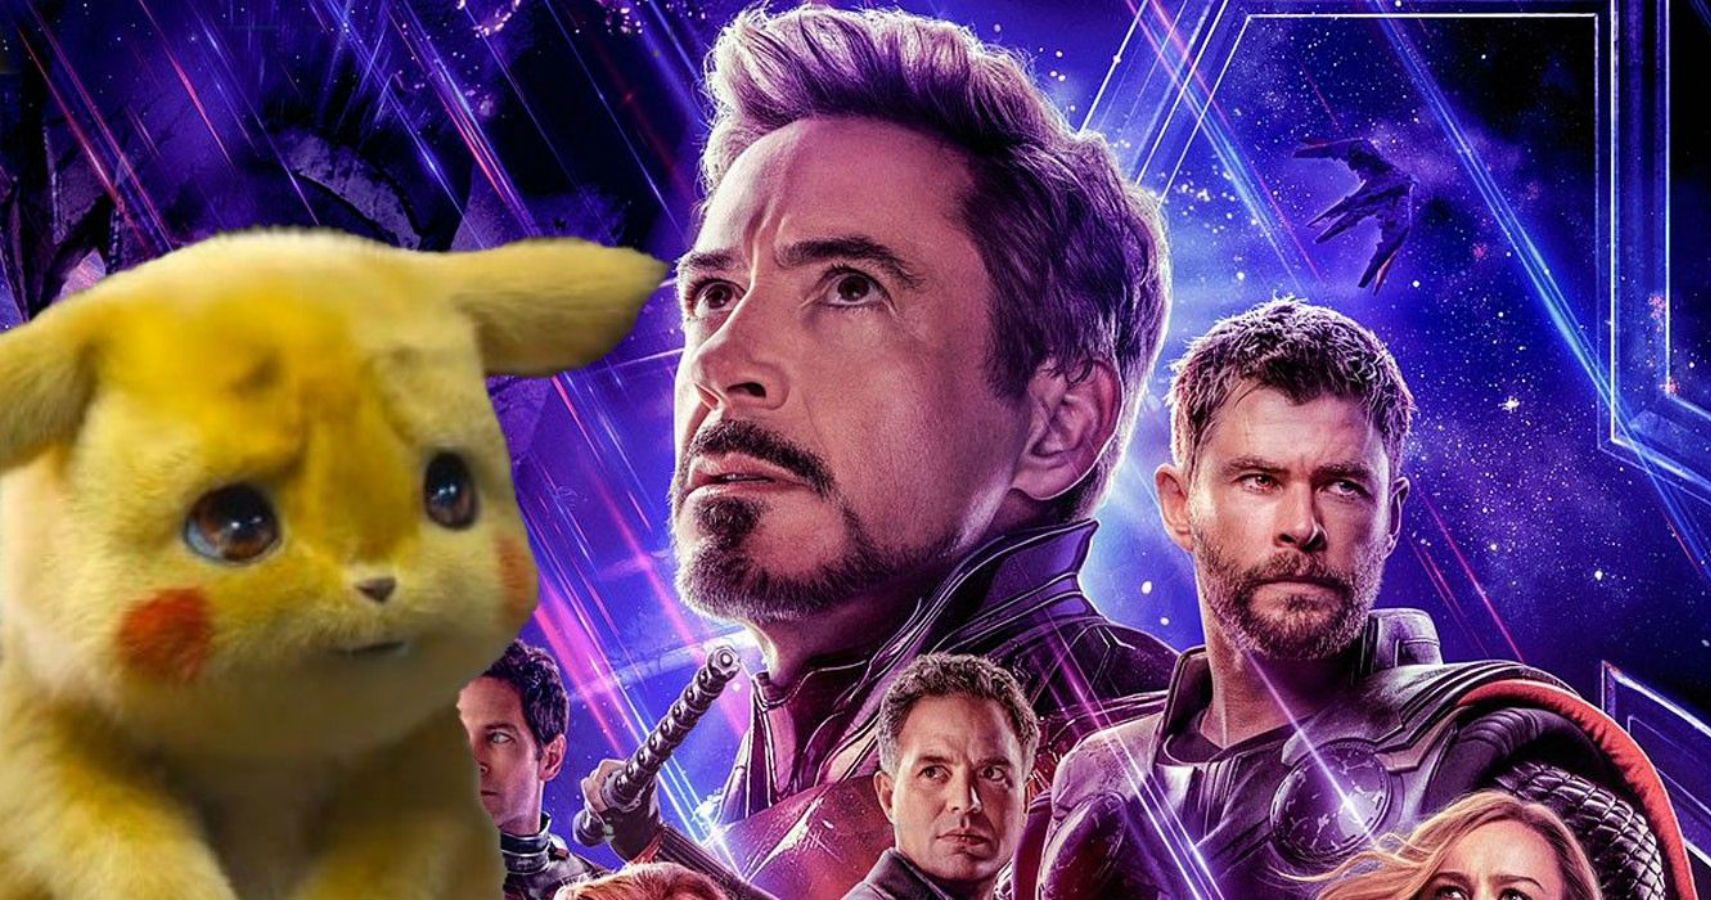 Why Sonic Did So Much Better Than Detective Pikachu At The Box Office